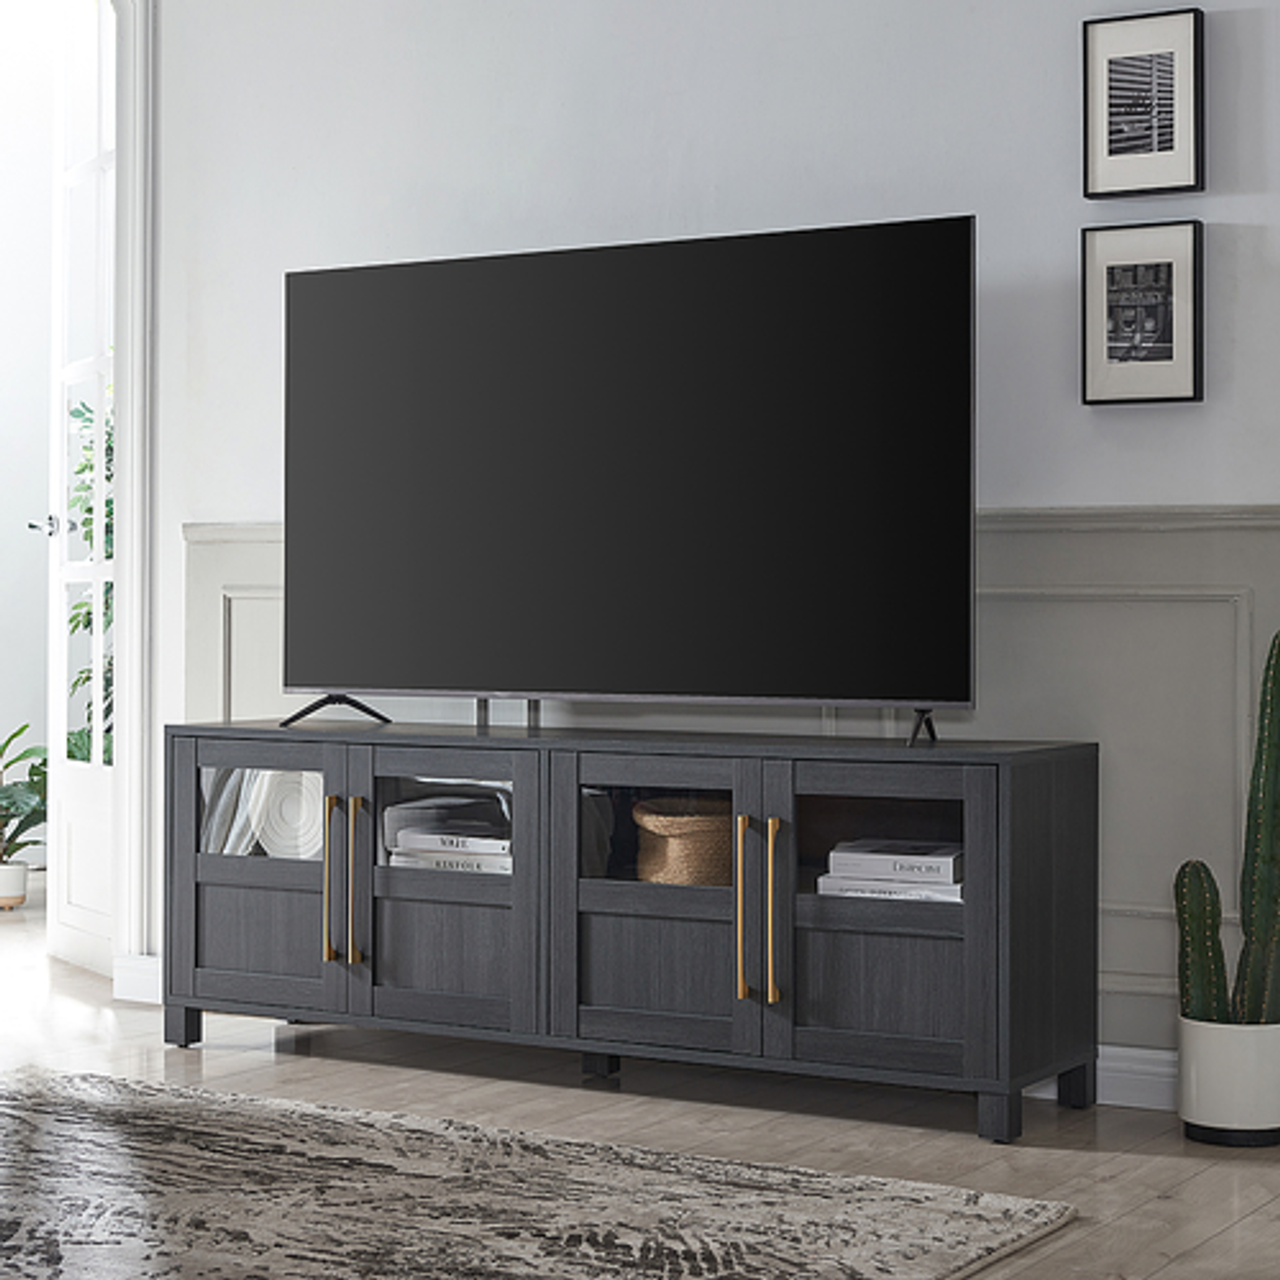 Camden&Wells - Holbrook TV Stand for Most TVs up to 75" - Charcoal Gray